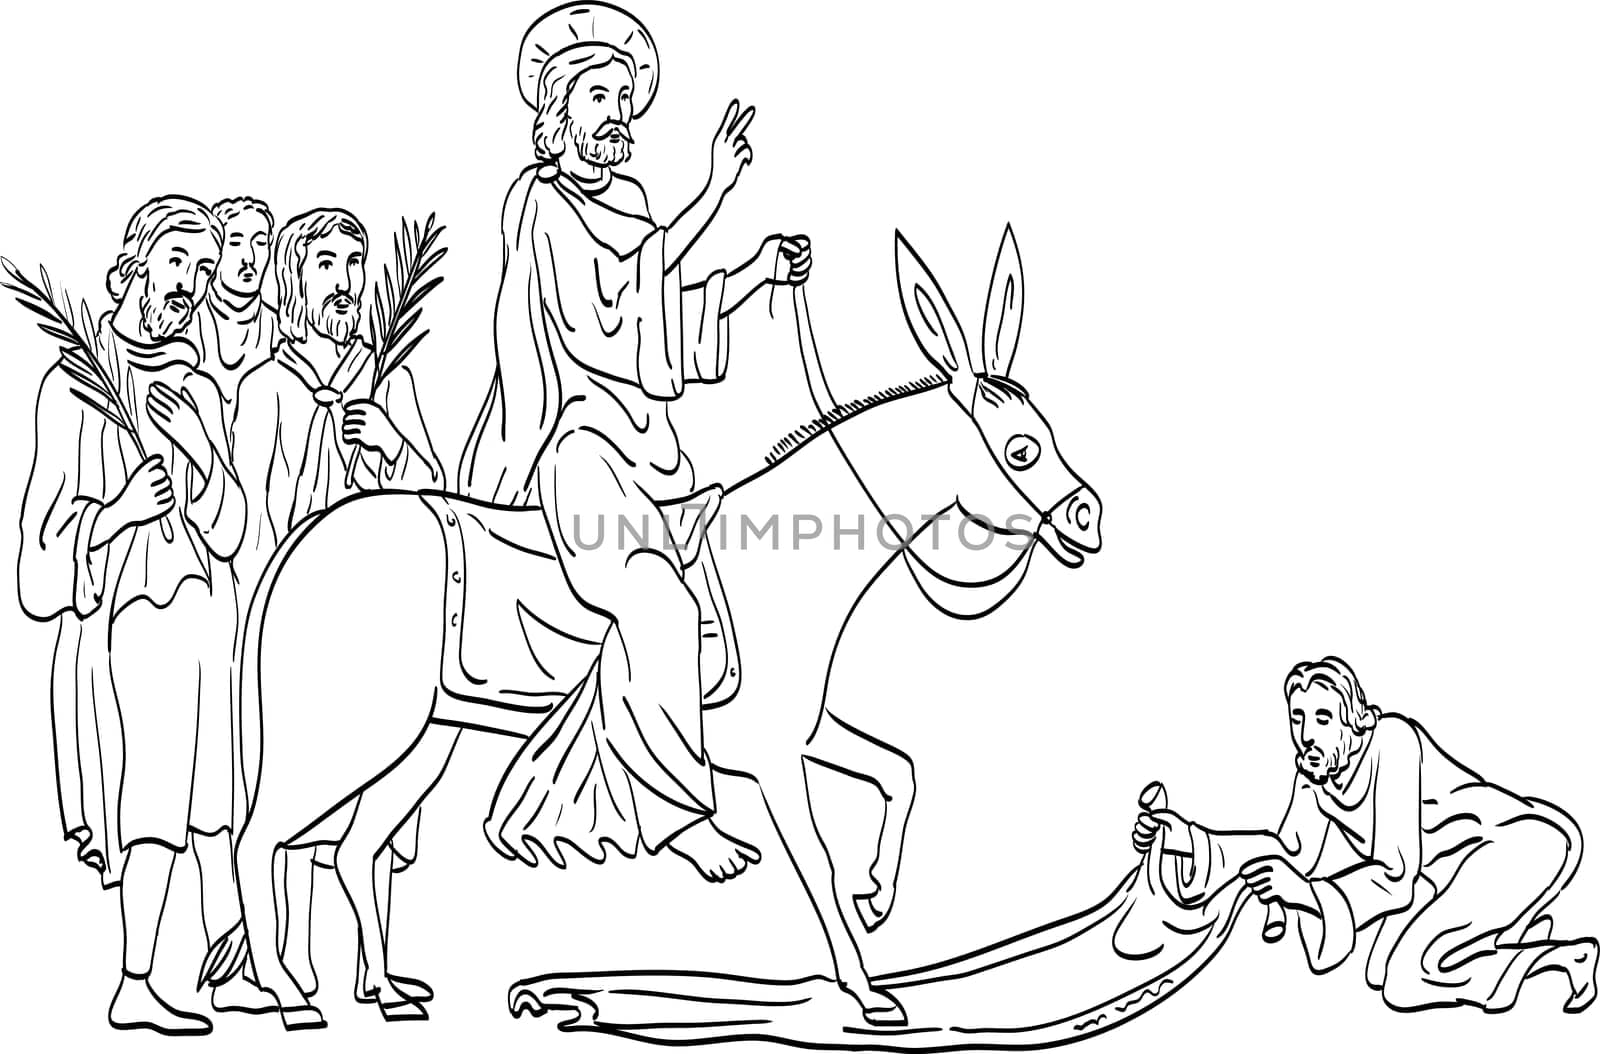 Line art drawing illustration of Jesus on Palm Sunday riding donkey being greeted by believers done in medieval style on isolated background in black and white.